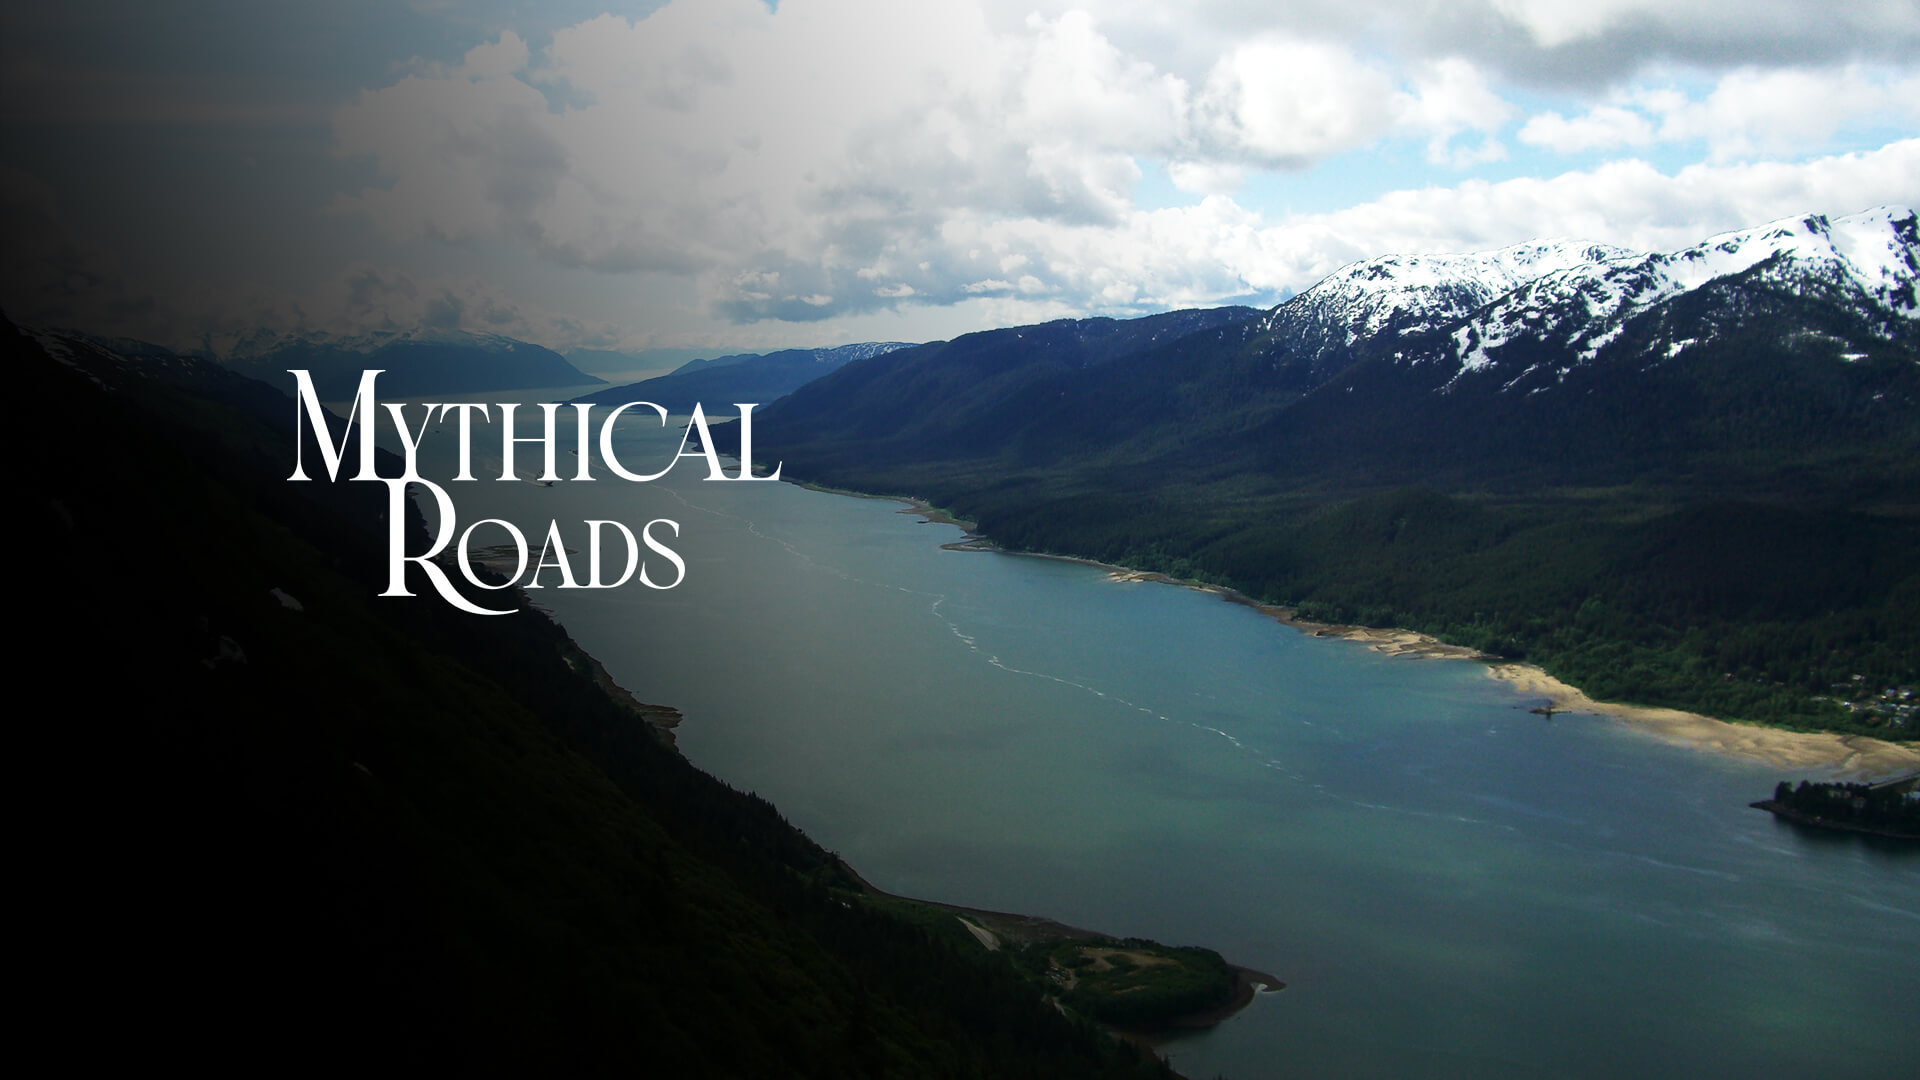 MYTHICAL ROADS